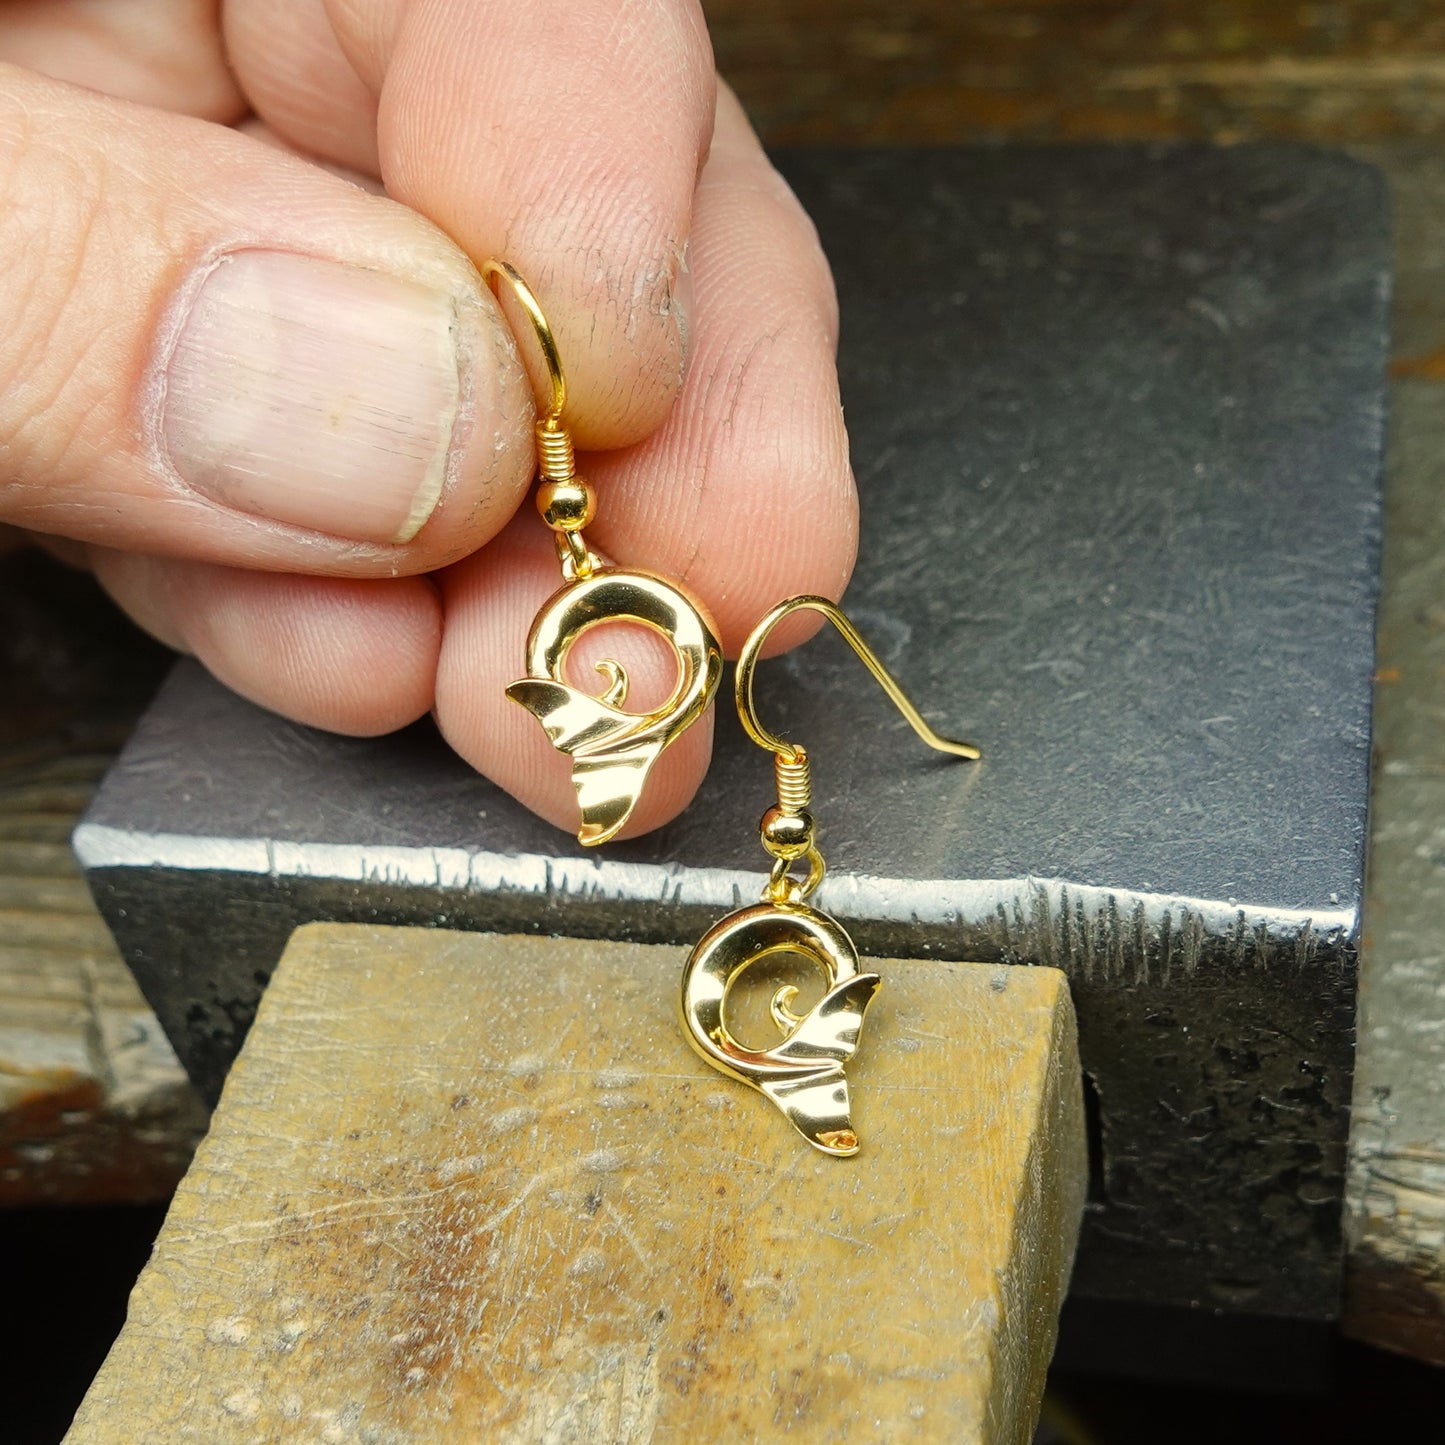 Whale tail earrings. Solid gold whale fluke earring designs with strong, gold, hook wires. This piece will be handmade for you.